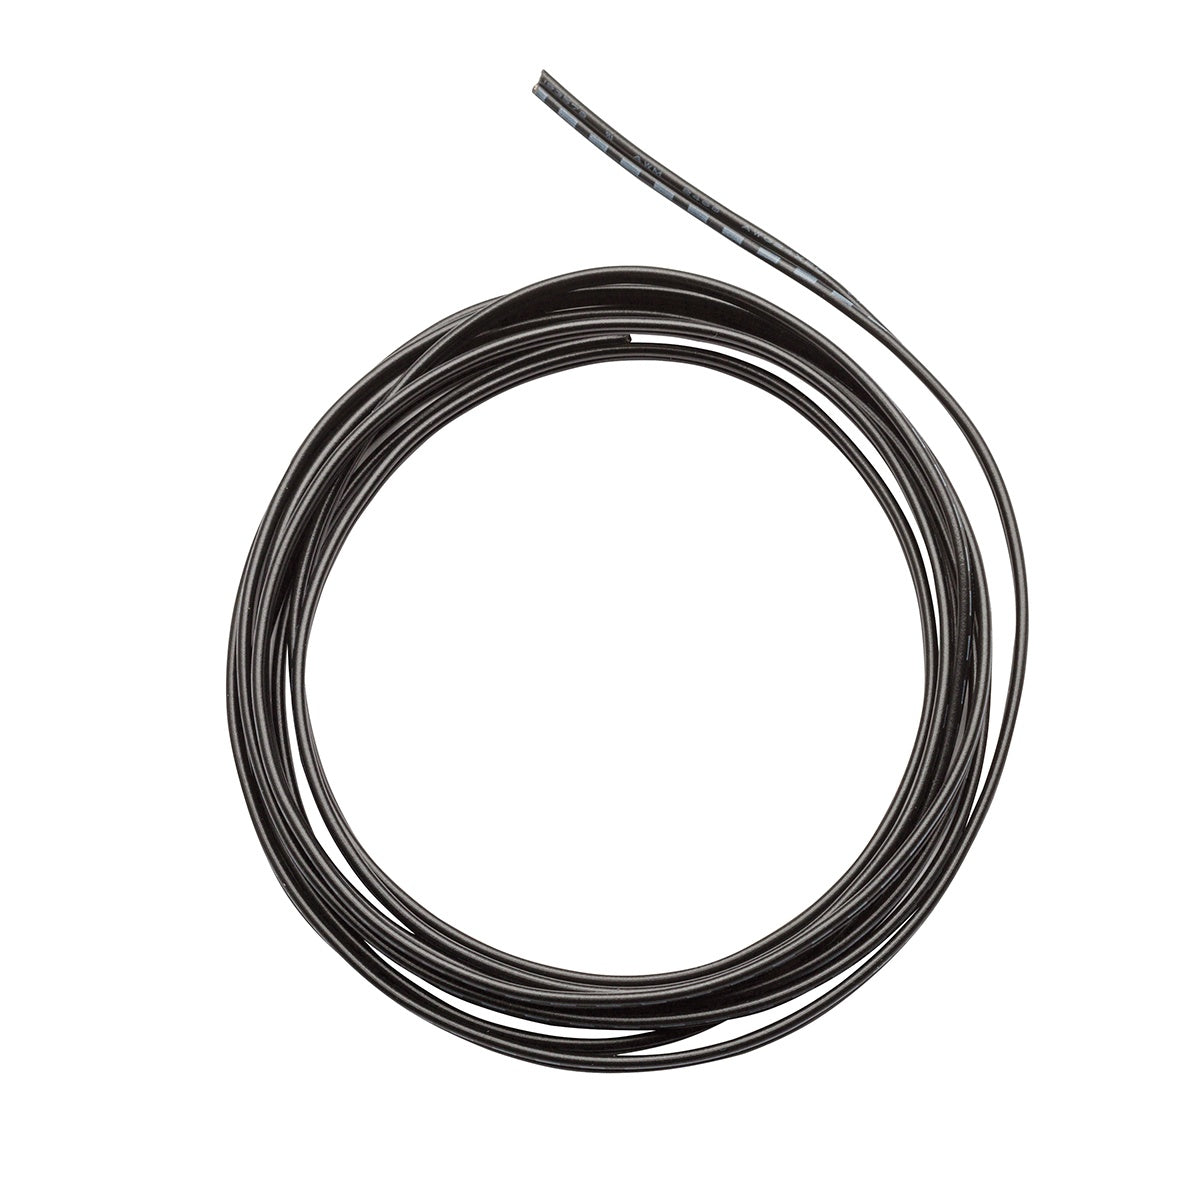 Kichler Canada - Low Voltage Wire 250ft - Low Voltage Wire - Black Material (Not Painted)- Union Lighting Luminaires Decor